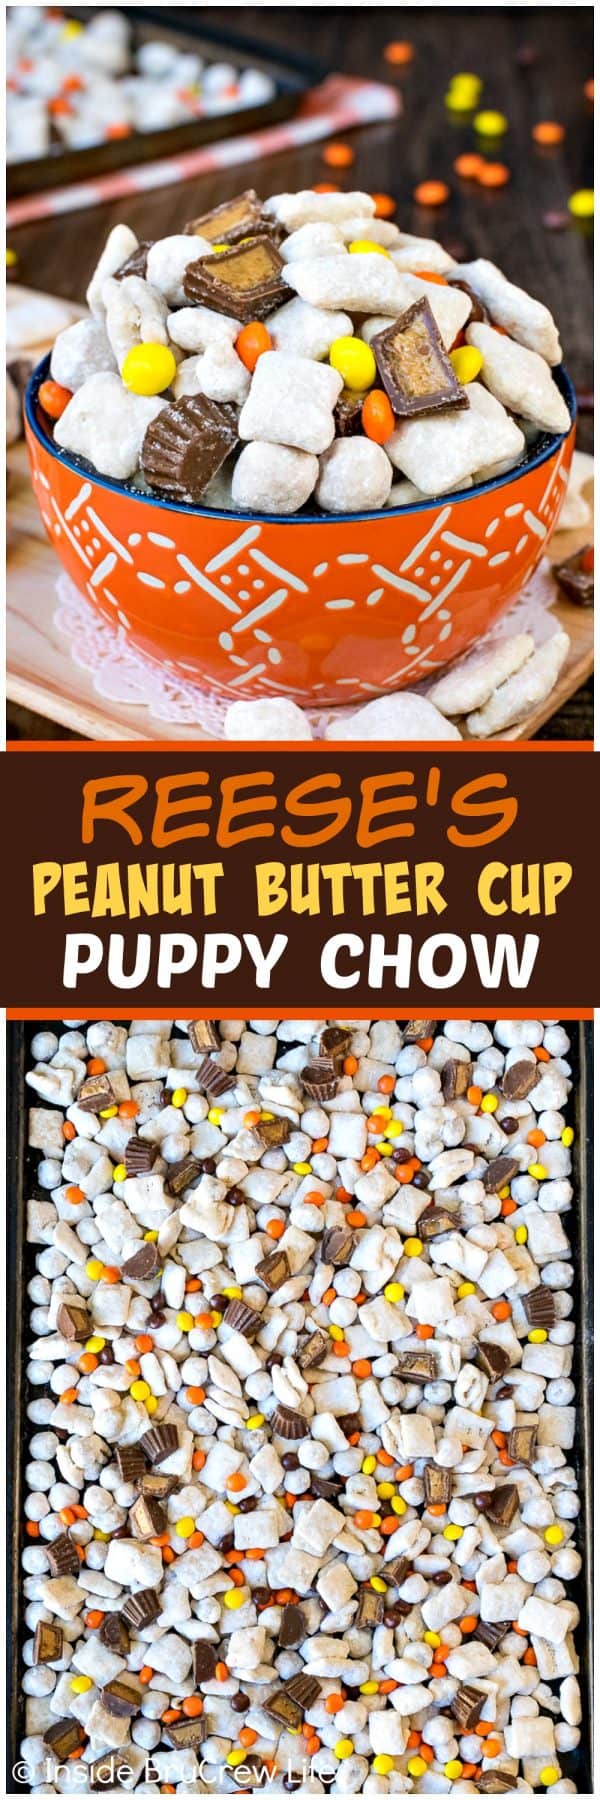 Peanut Butter Cup Puppy Chow - this easy snack mix is made with two kinds of cereal and peanut butter candies. Easy no bake recipe that is ready in minutes. Perfect for parties! #peanutbutter #snackmix #chexcereal #puppychow #muddybuddies #nobake #reesespeanutbuttercups